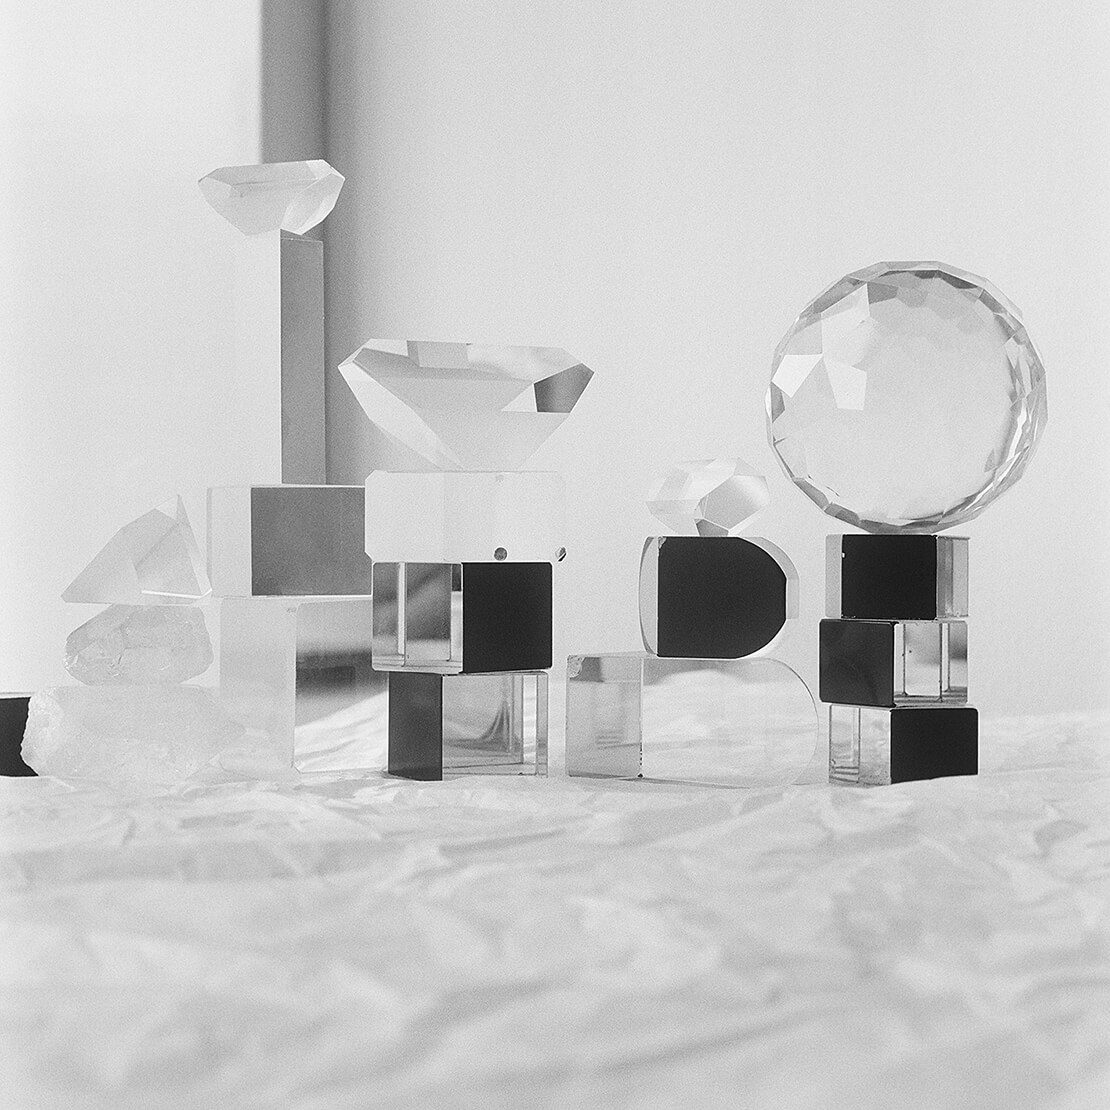 Rosa John, Gläserne Gebilde (A lens can be thought of as being composed of many prisms), 2020/21, Copyright: Rosa John / Bildrecht 